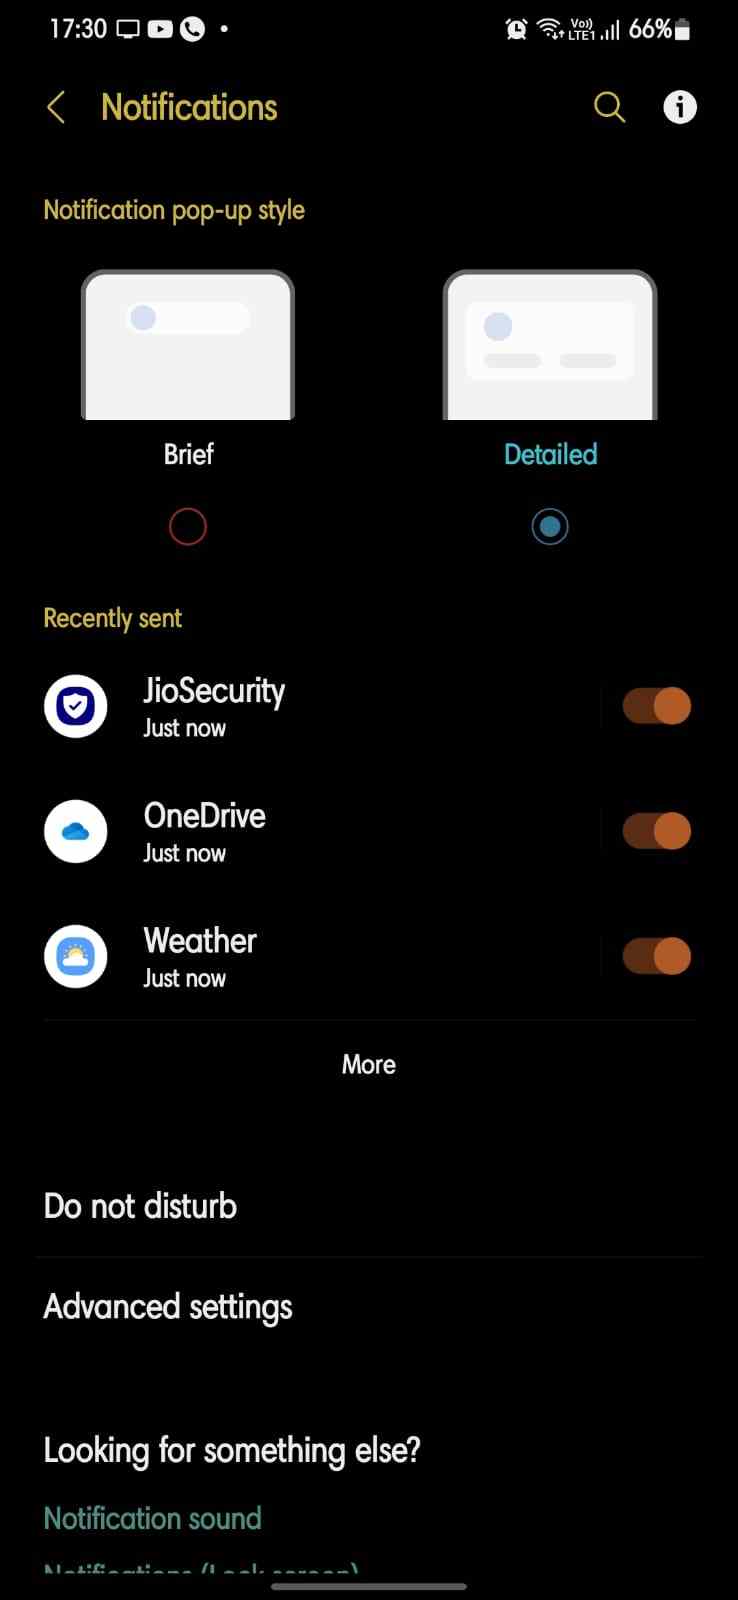 how to stop notifications on android, turn off app notifications android, how to turn off notifications for apps, android notification settings, stop notifications on phone, disable app notifications